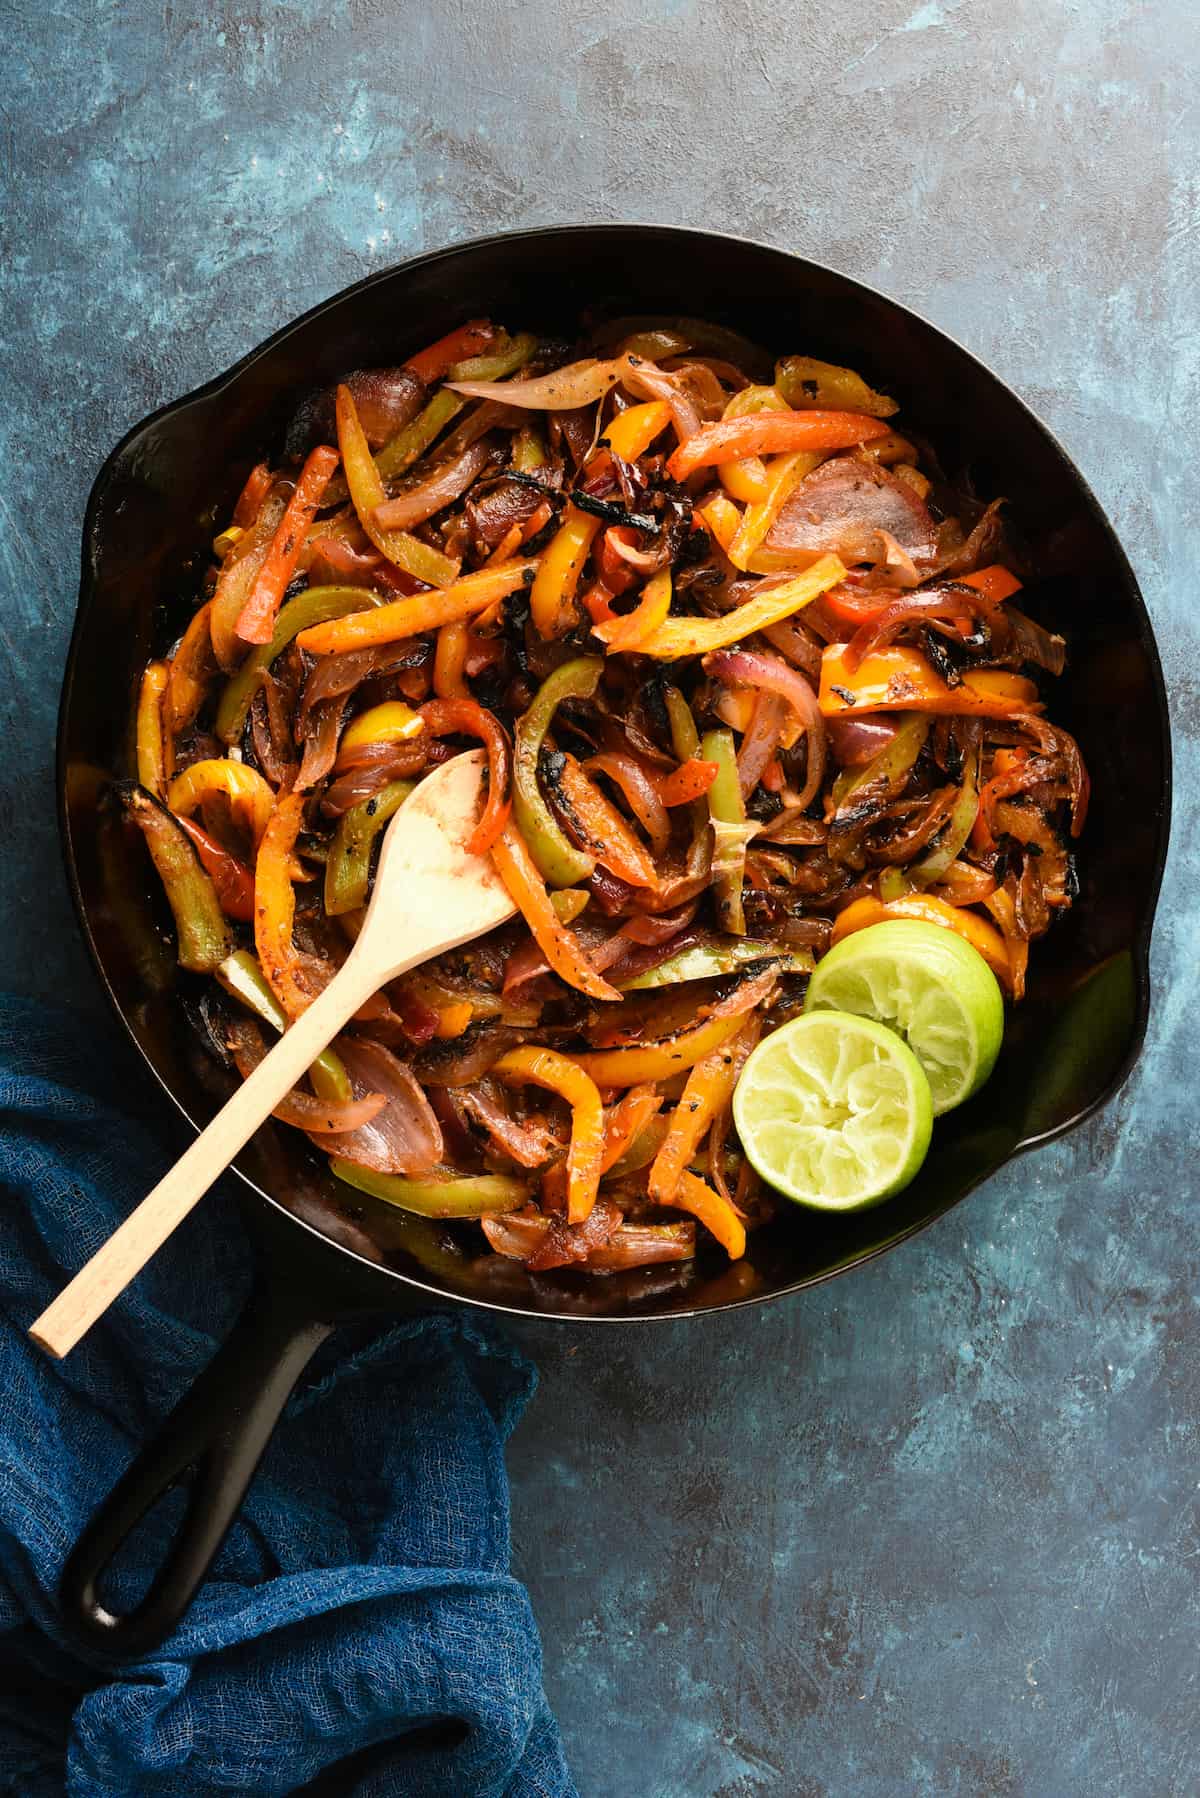 Cast iron skillet filled with cooked fajita veggies, with wooden spoon and lime halves.